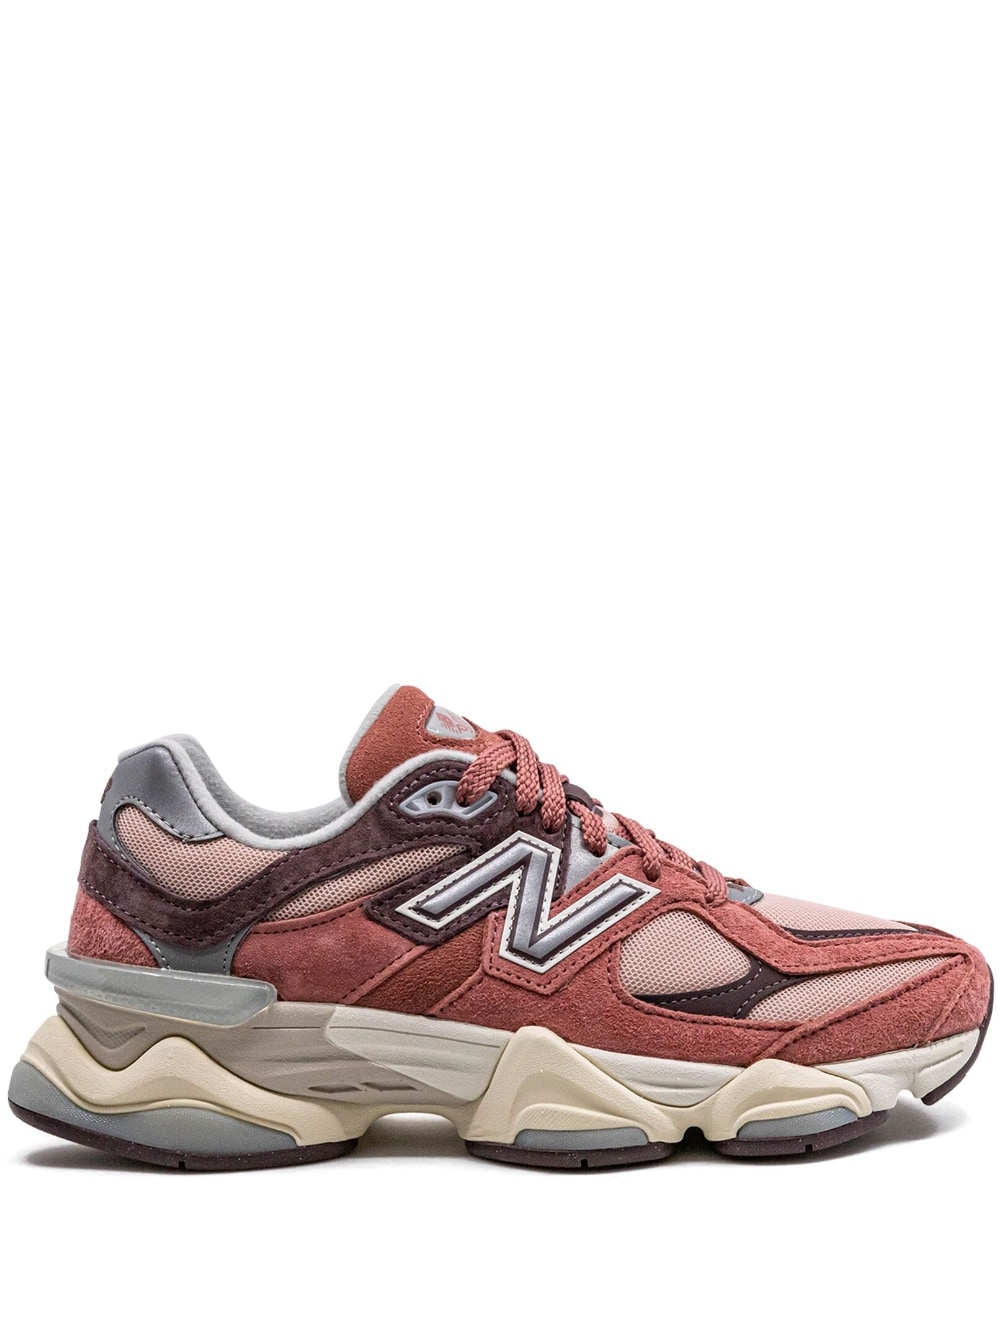 New Balance 9060 "Mineral Red/Truffle" sneakers